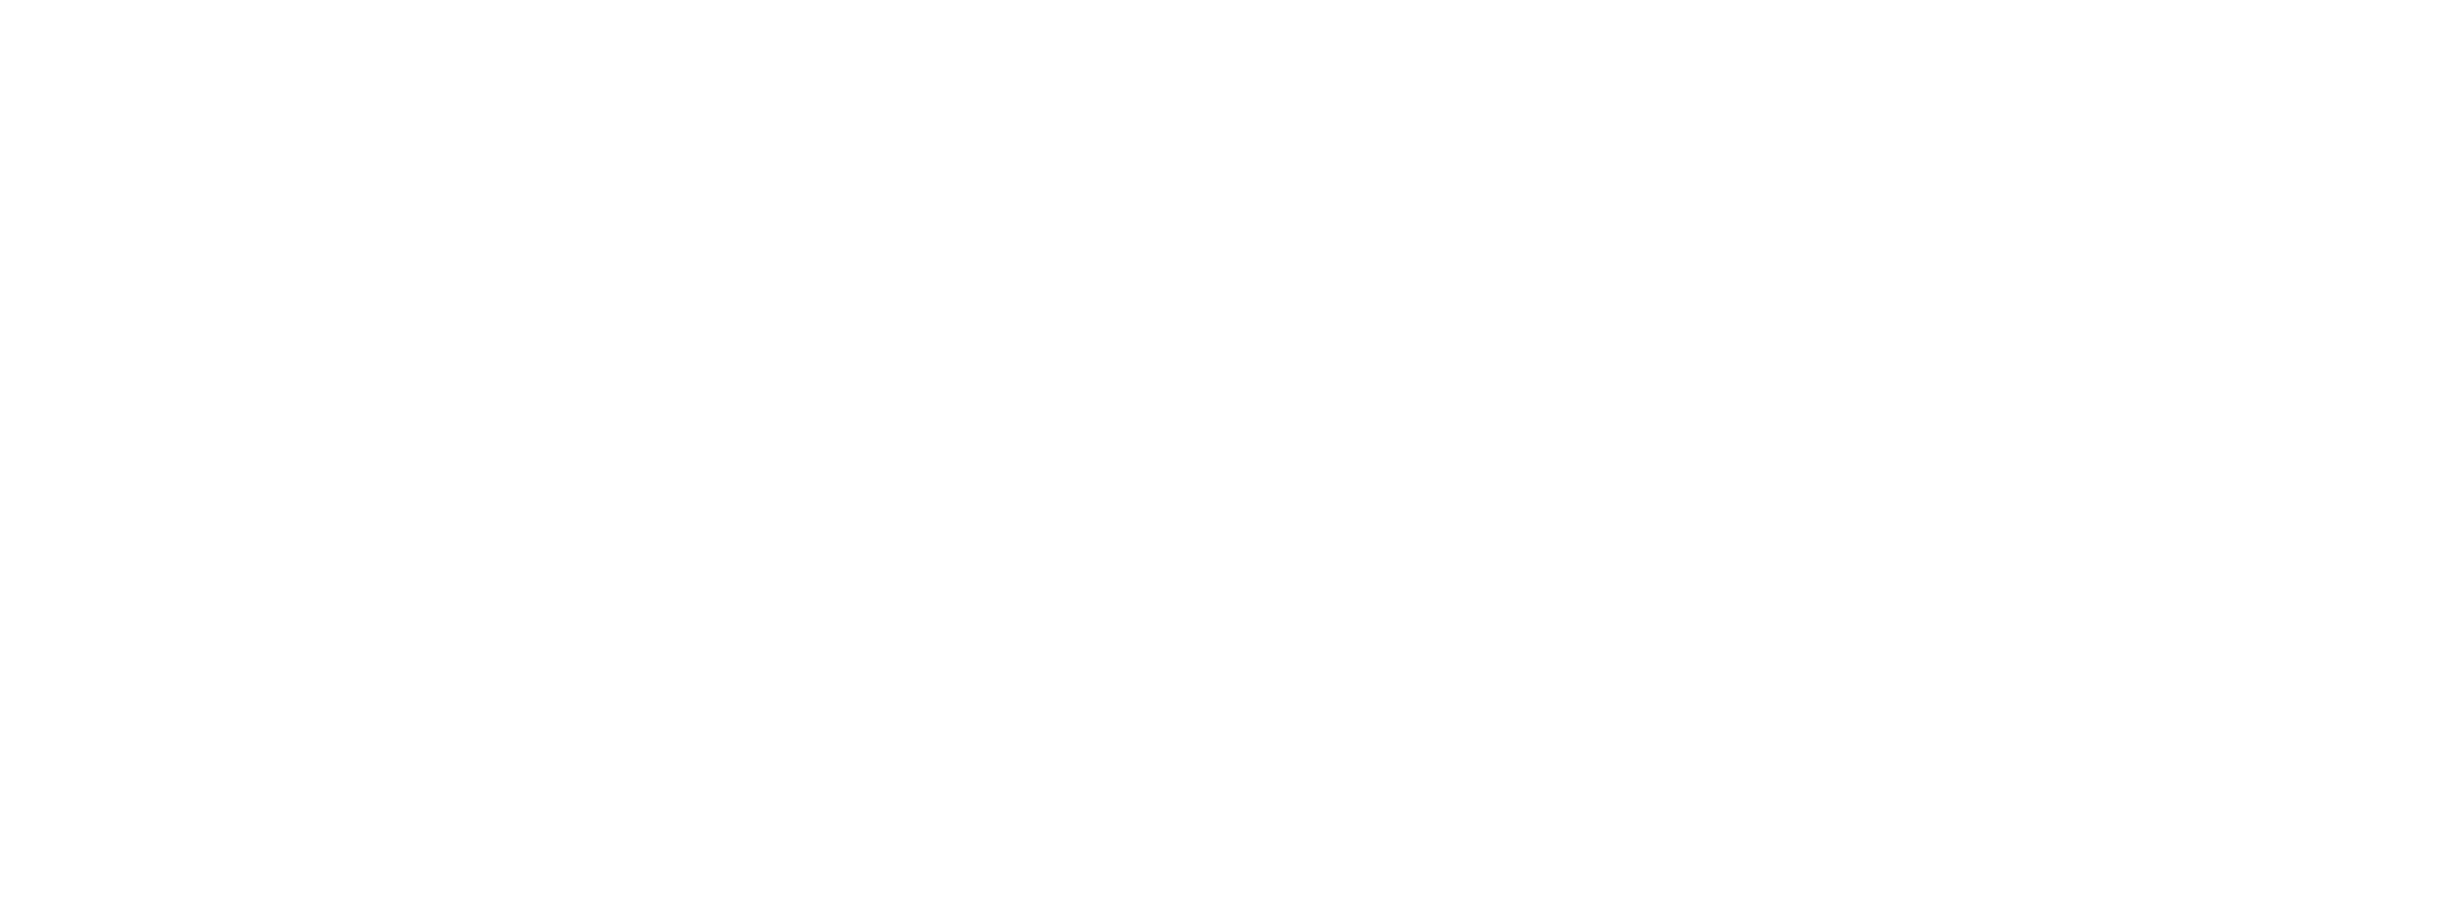 Black and White Construction Logo - Commercial Construction Company. UK & South